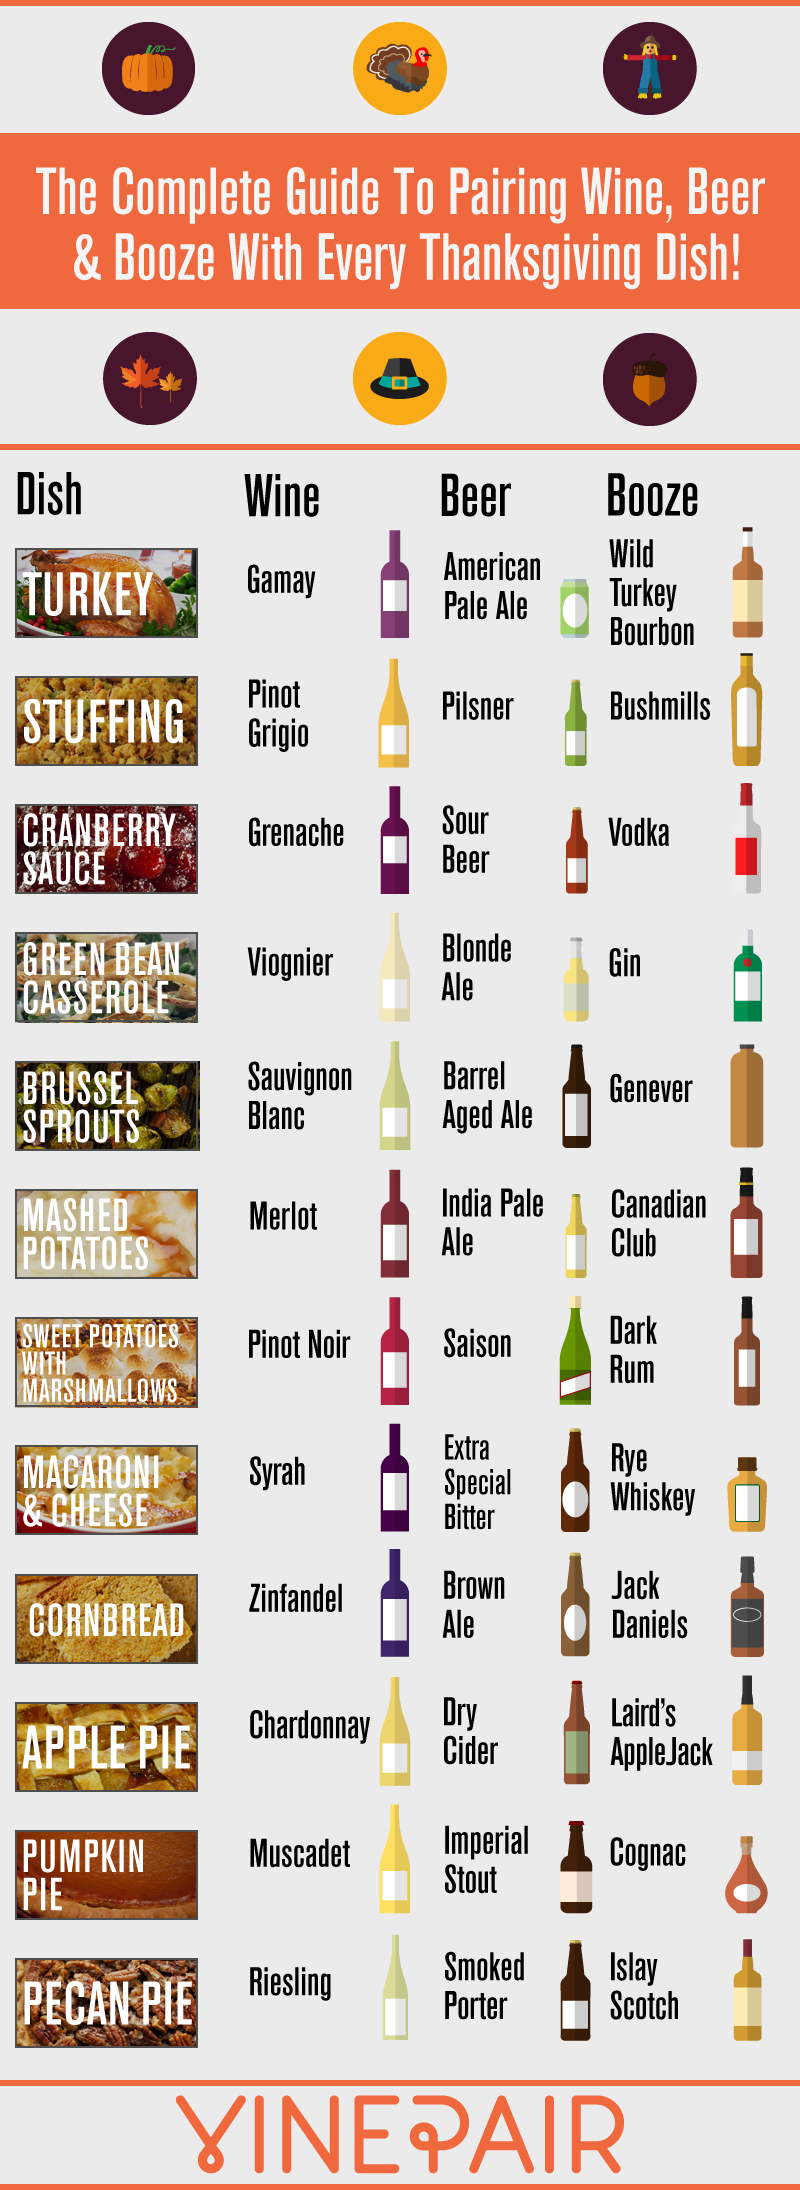 Wine, Beer & Booze Pairings For Every Thanksgiving Dish ...